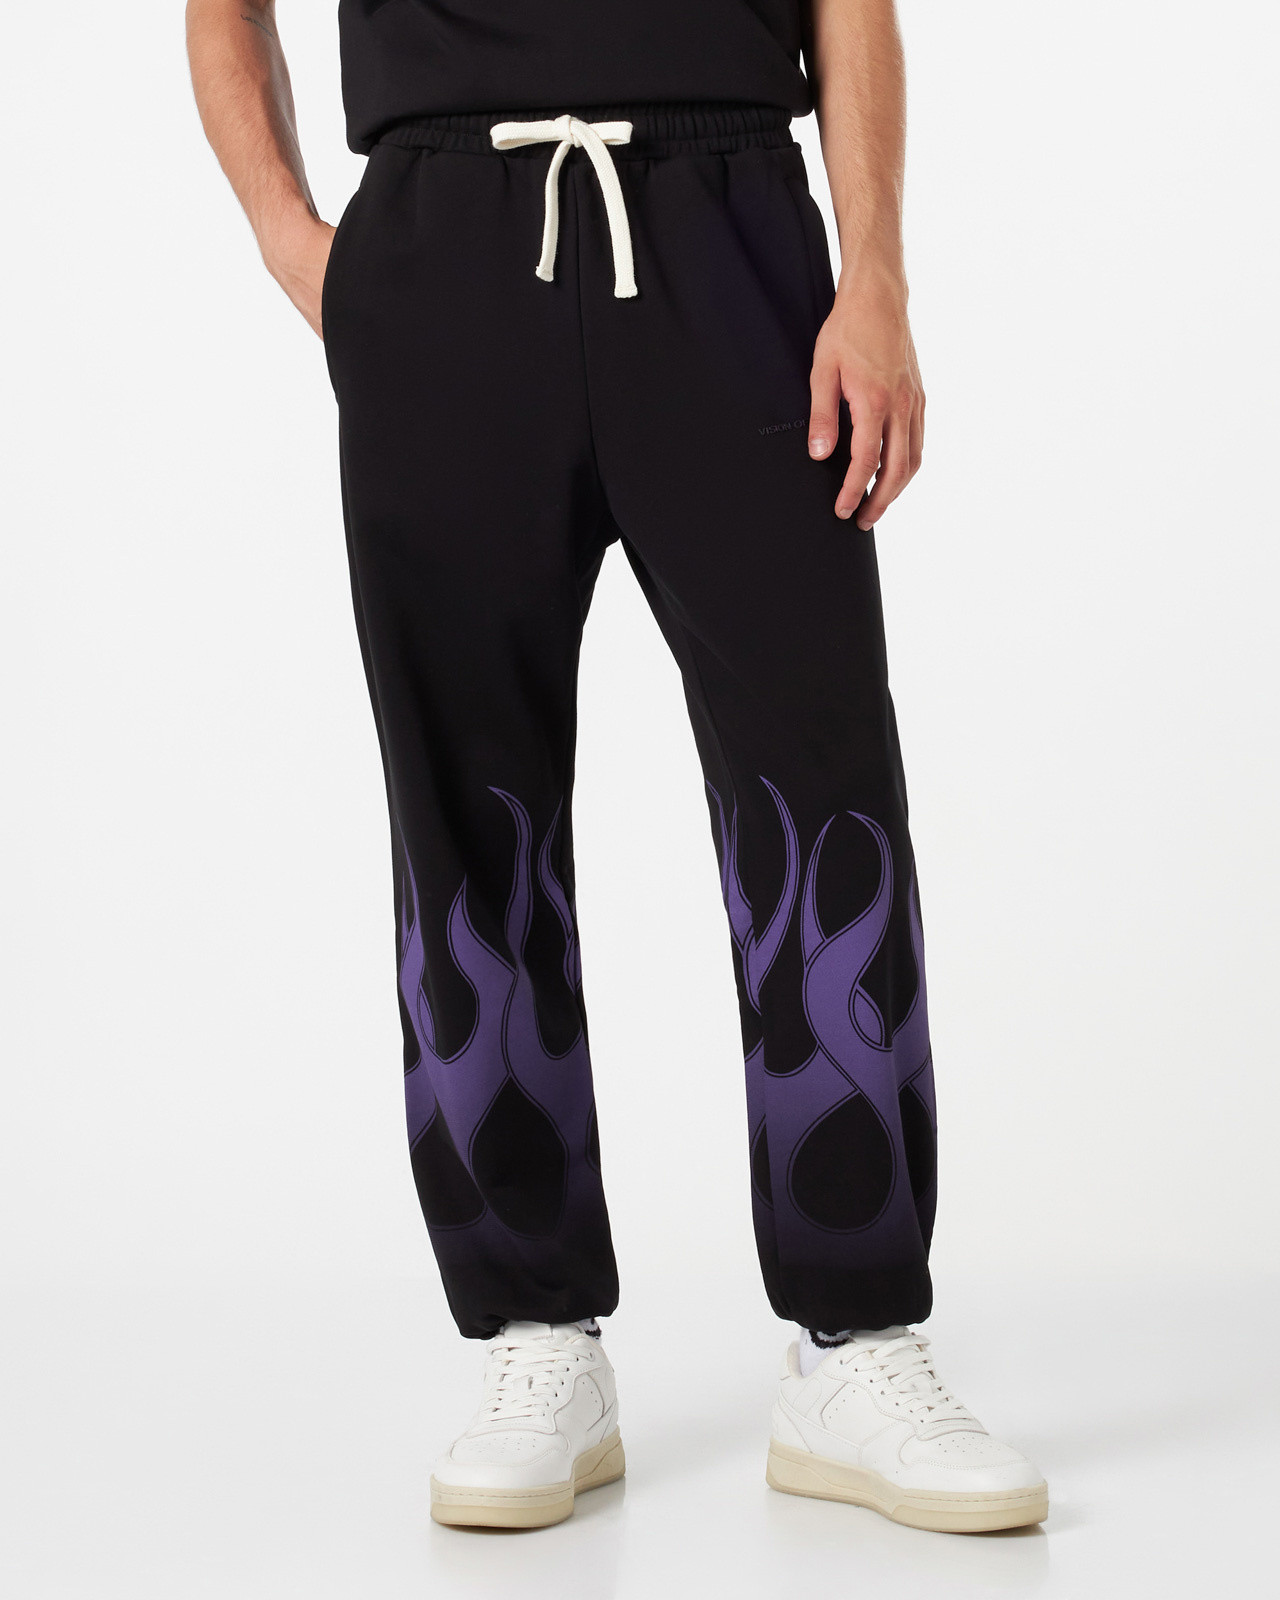 Vision of Super - Pantaloni con fiamme racing, Nero, large image number 3